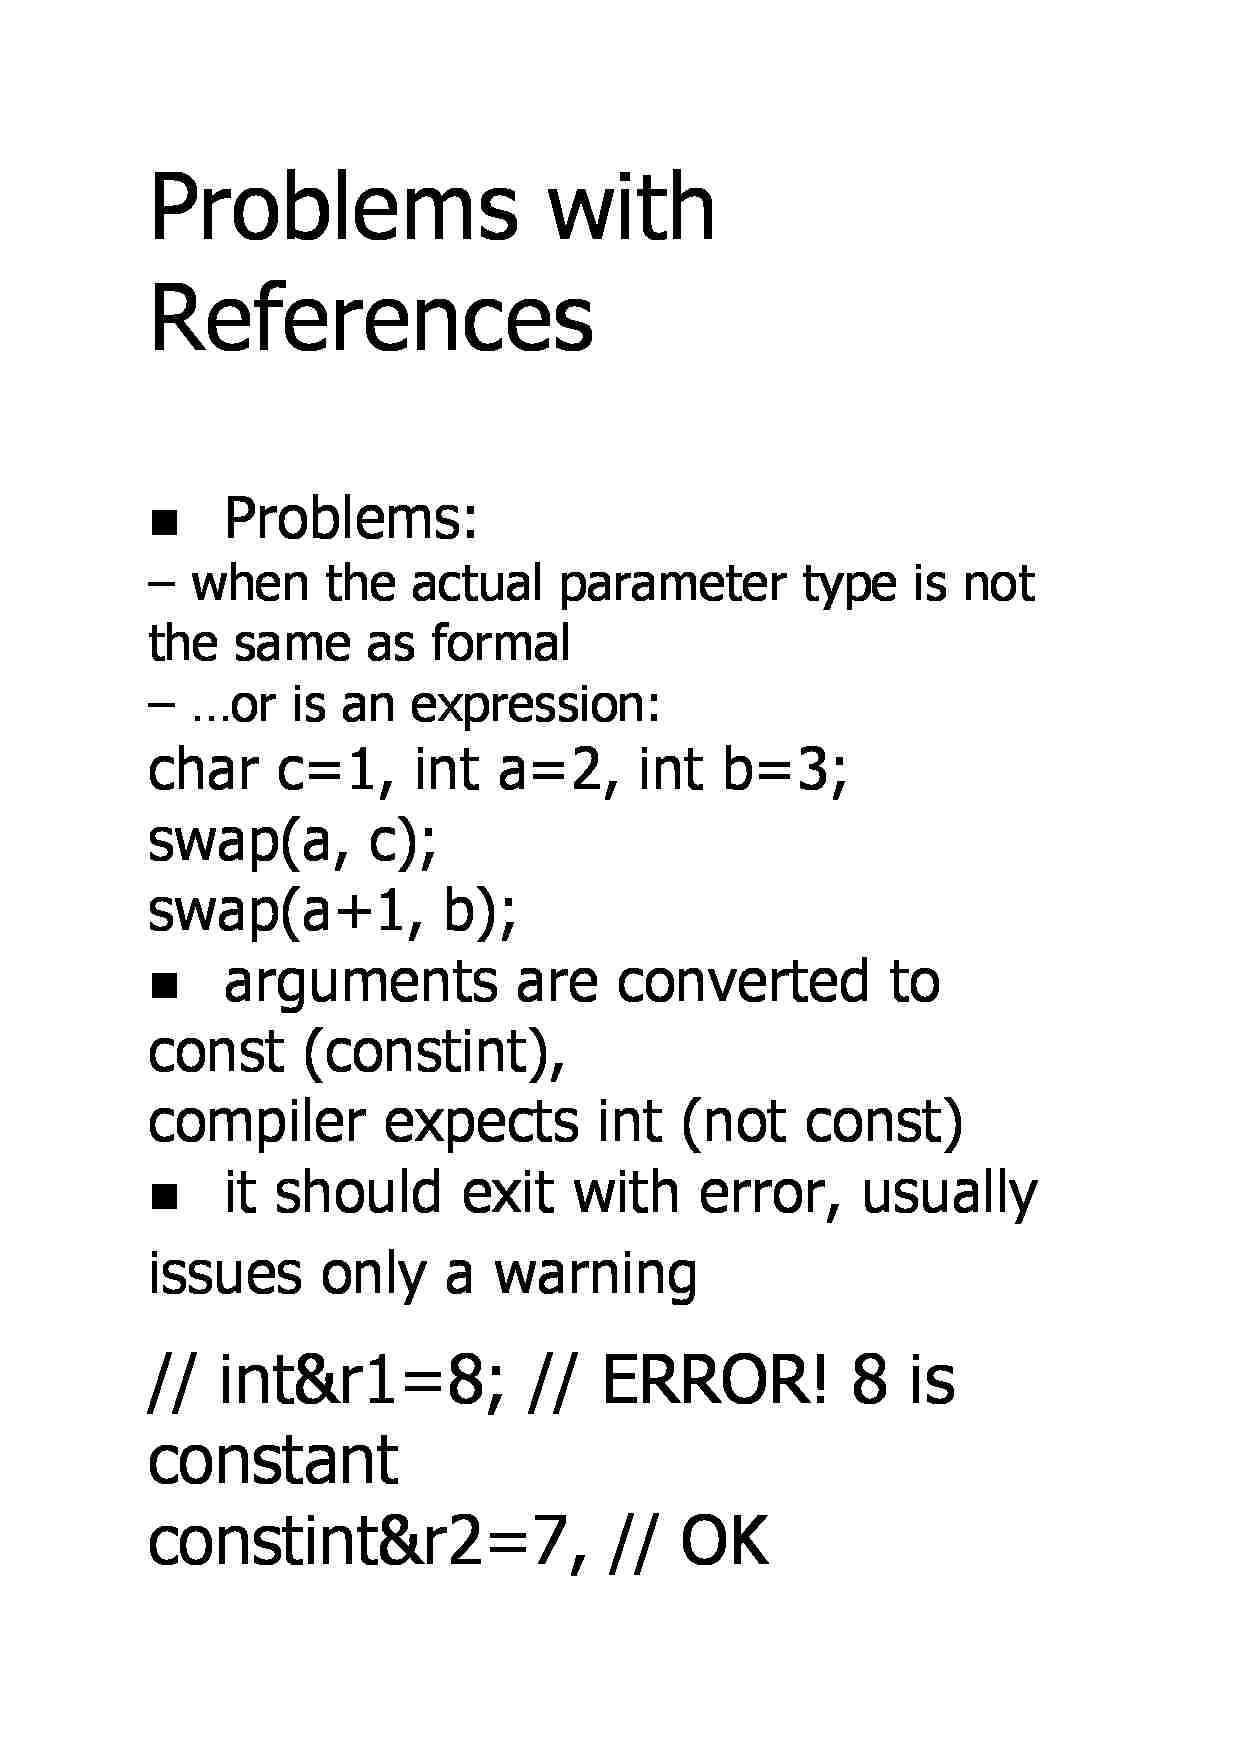 Problems with References - strona 1